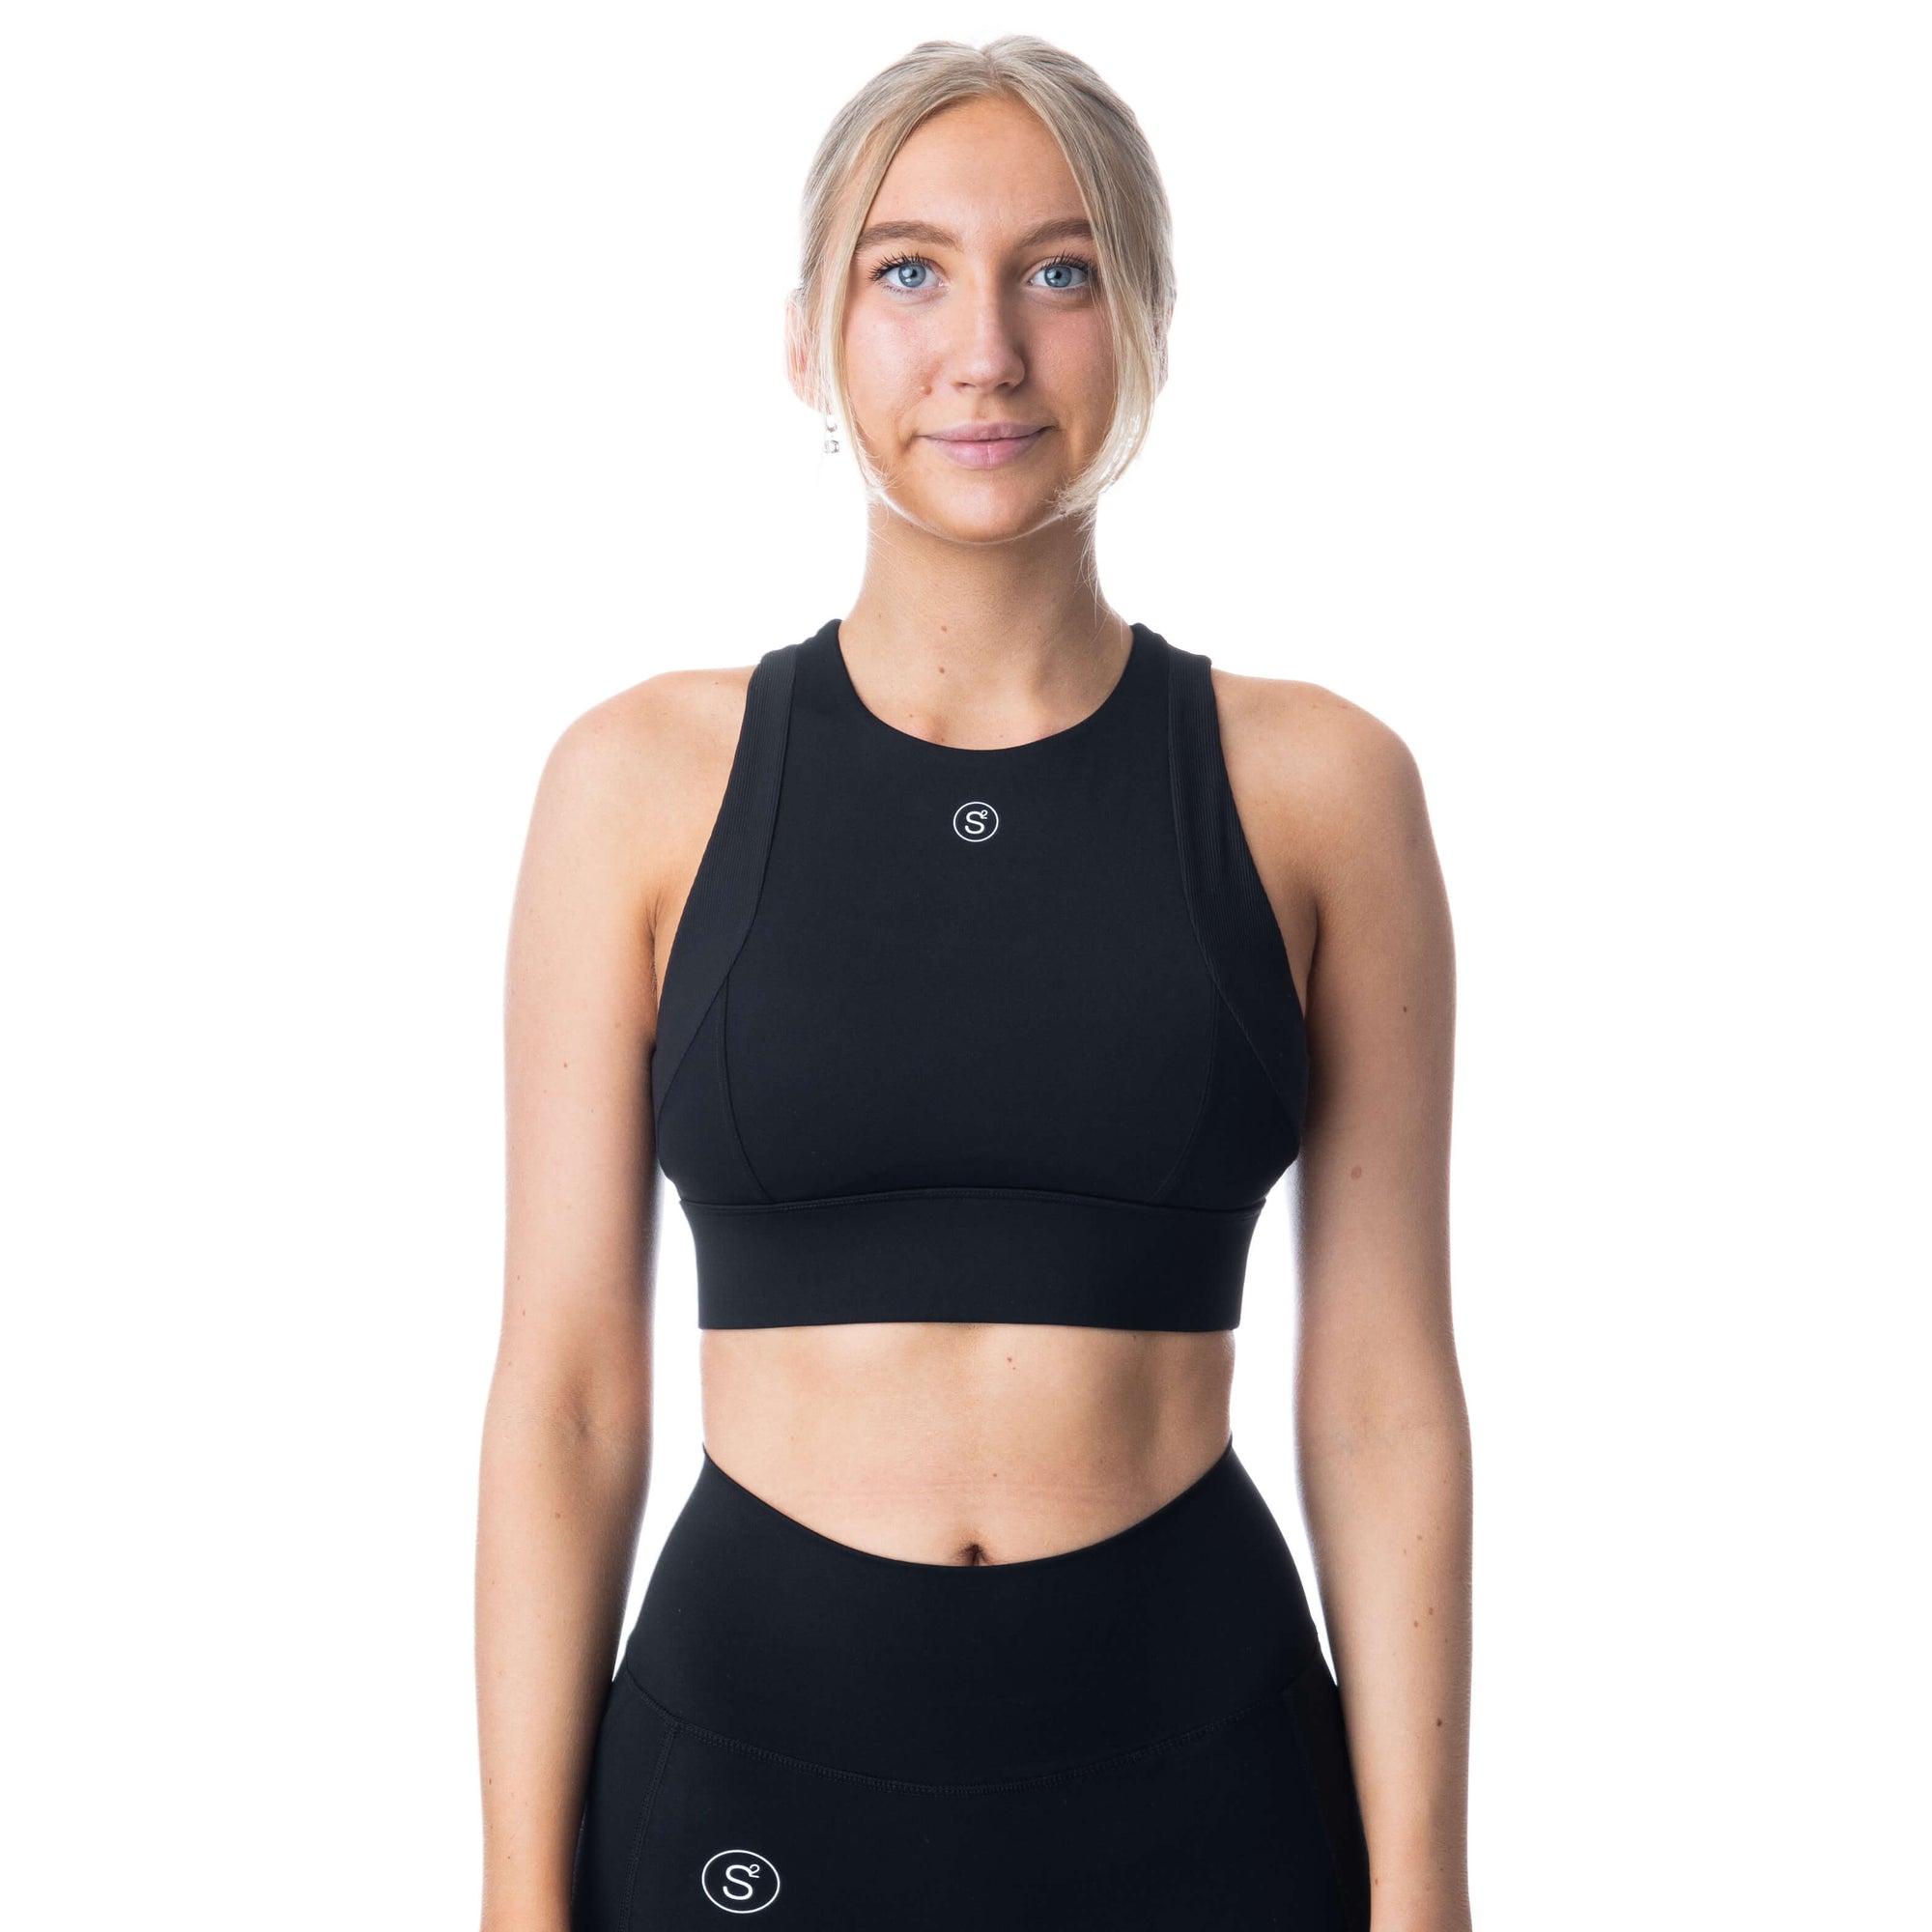  Other Stories Halter Yoga Bra  Online shopping clothes, Yoga